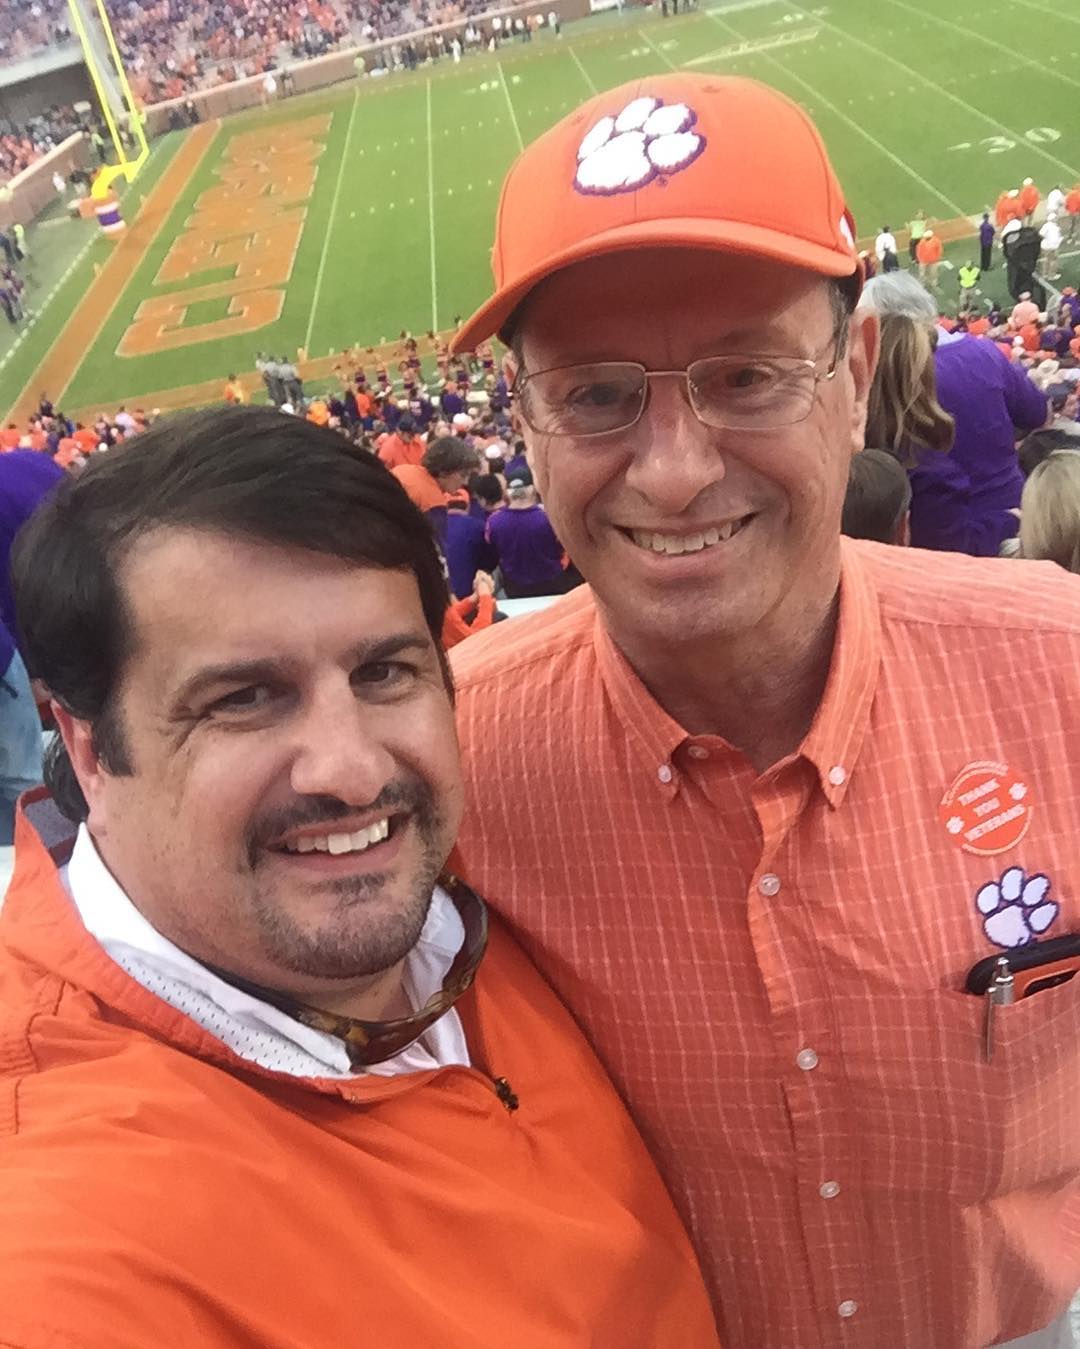 Another great game...another great #selfie with this Clemson Tiger and Vietnam Veteran! #MilitaryAppreciation #GoTigers